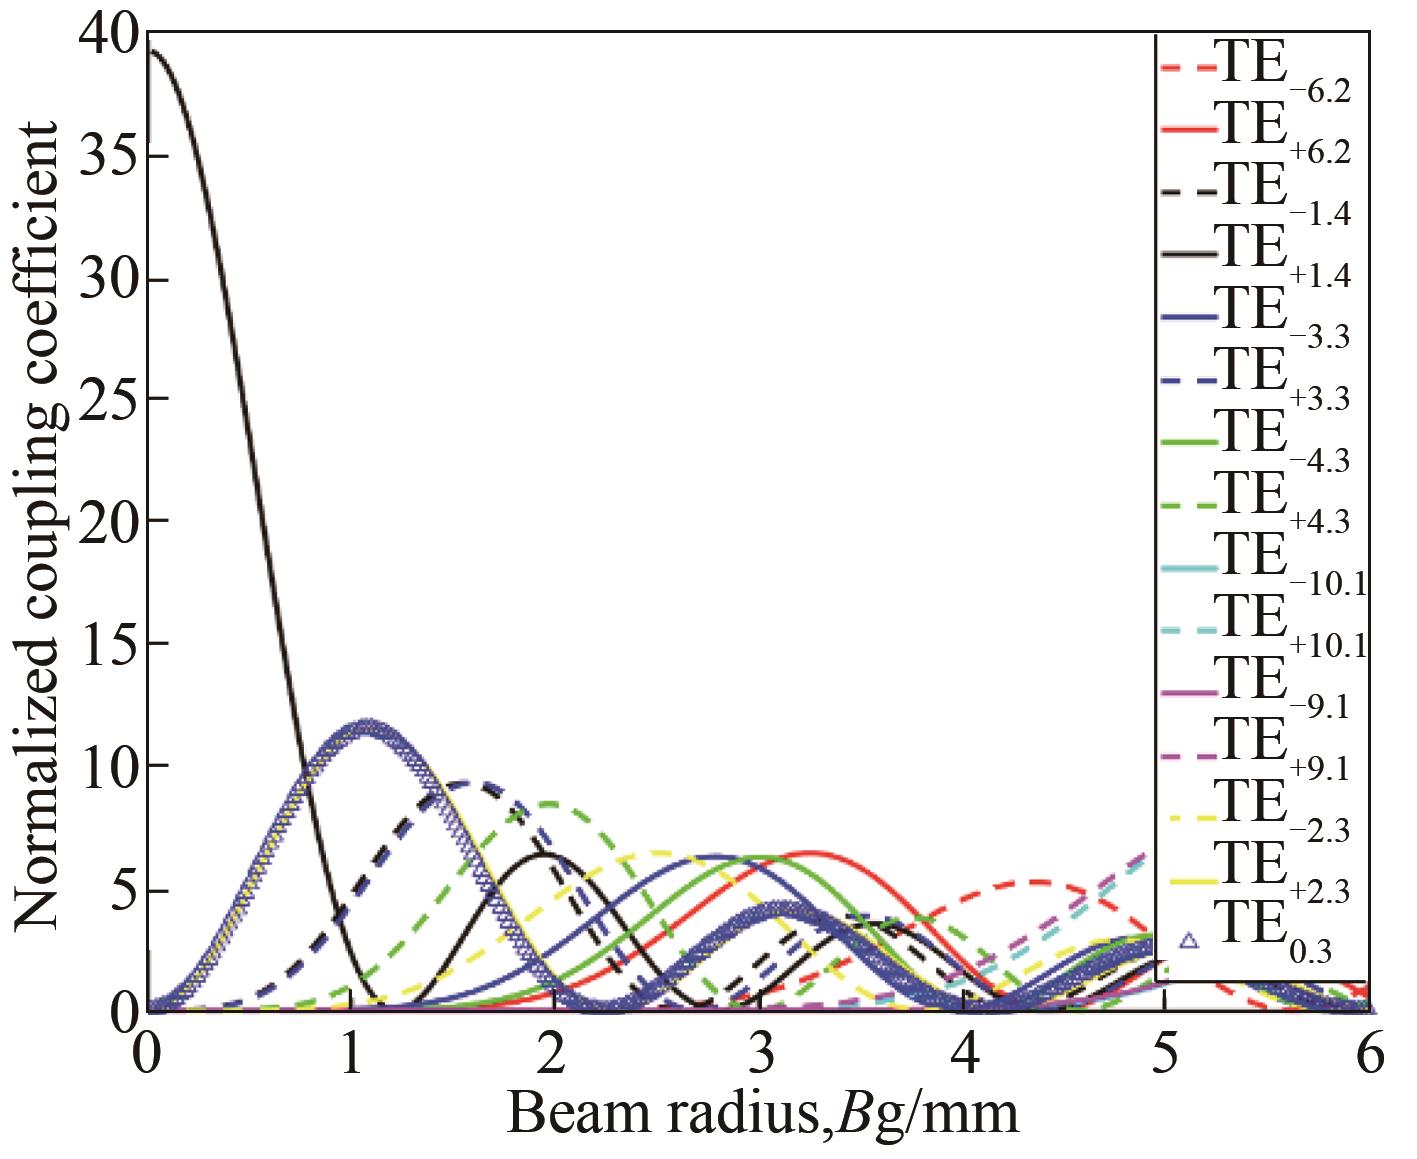 The normalized beam-wave coupling coefficient of the dominant and competitive modes varies with beam radius